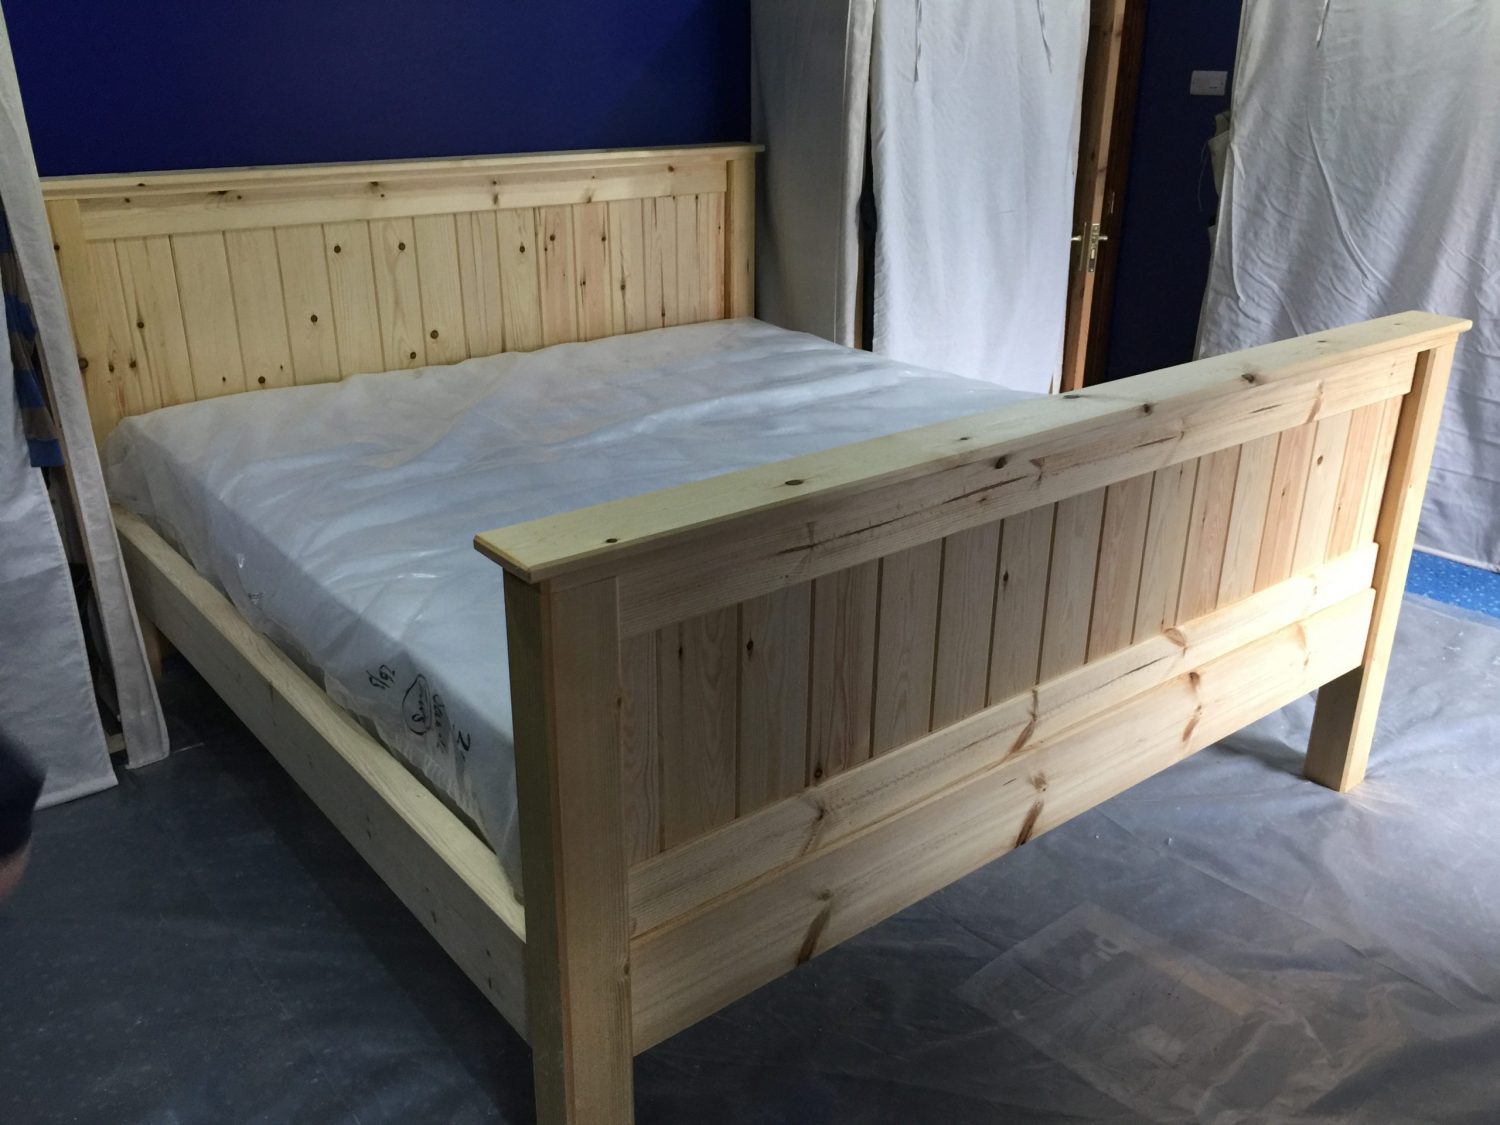 The finished Pine Bed